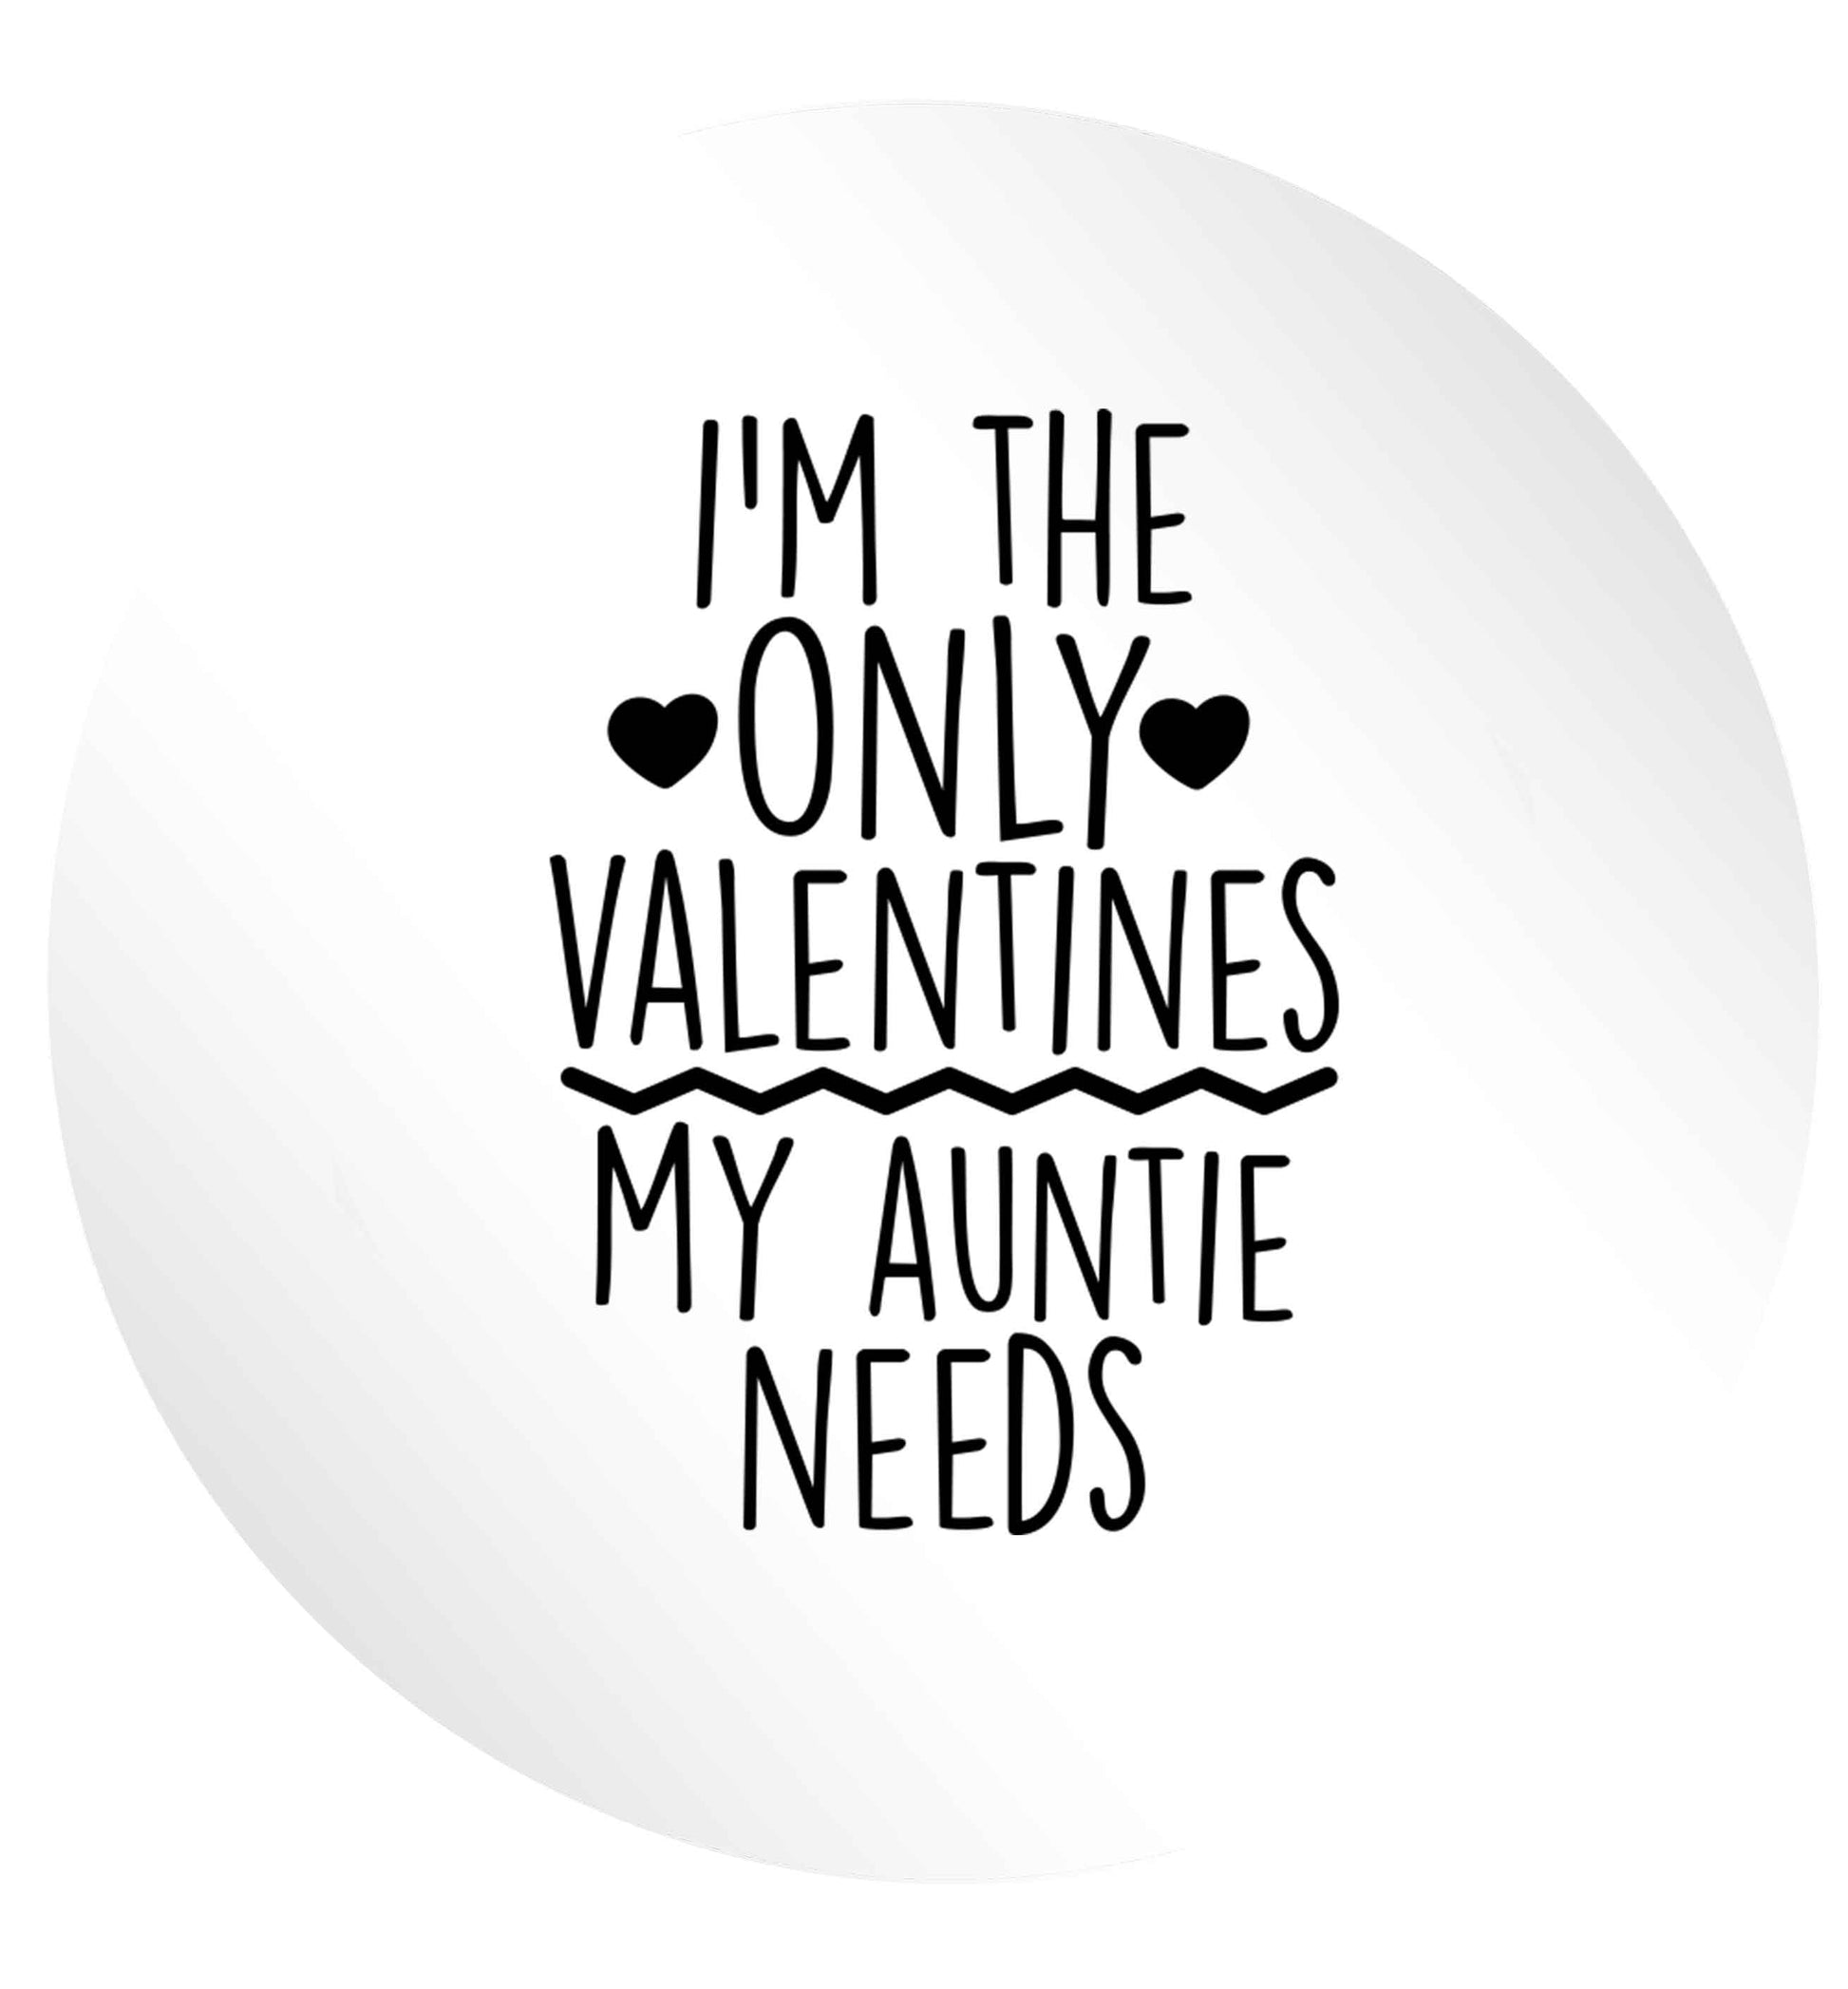 I'm the only valentines my auntie needs 24 @ 45mm matt circle stickers